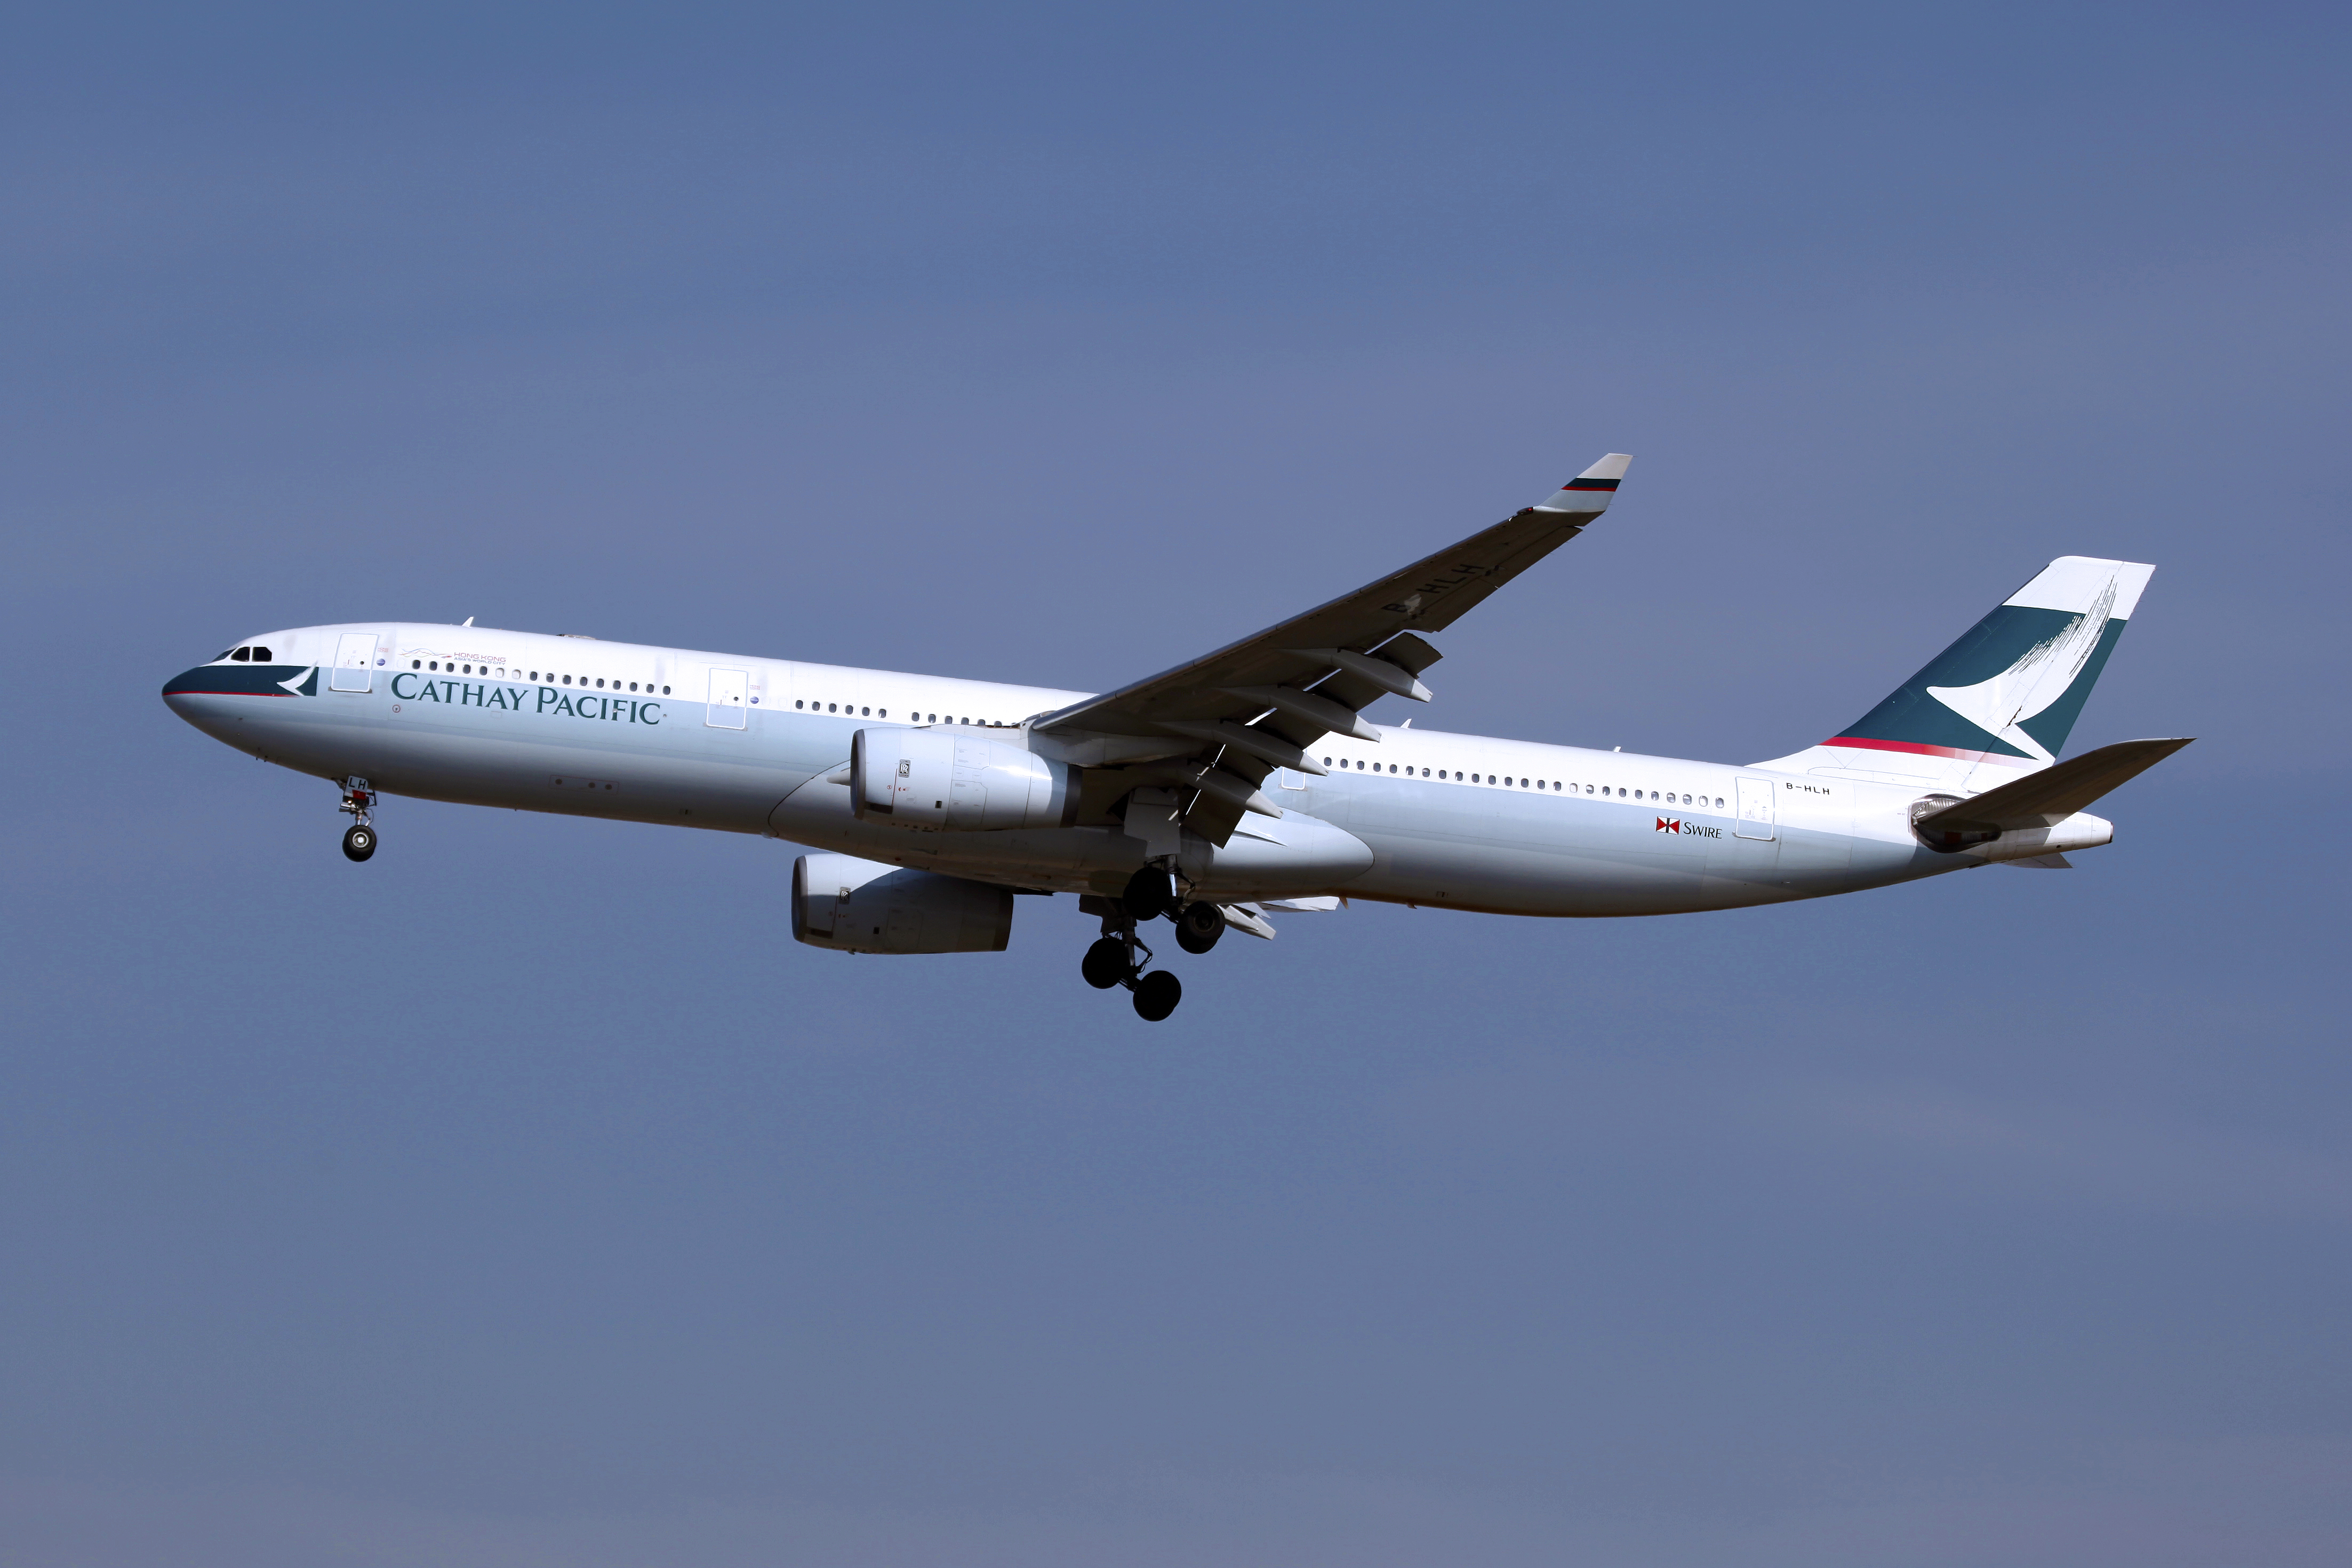 B-HLH_-_Cathay_Pacific_-_Airbus_A330-342_-_ICN_(16189426974)